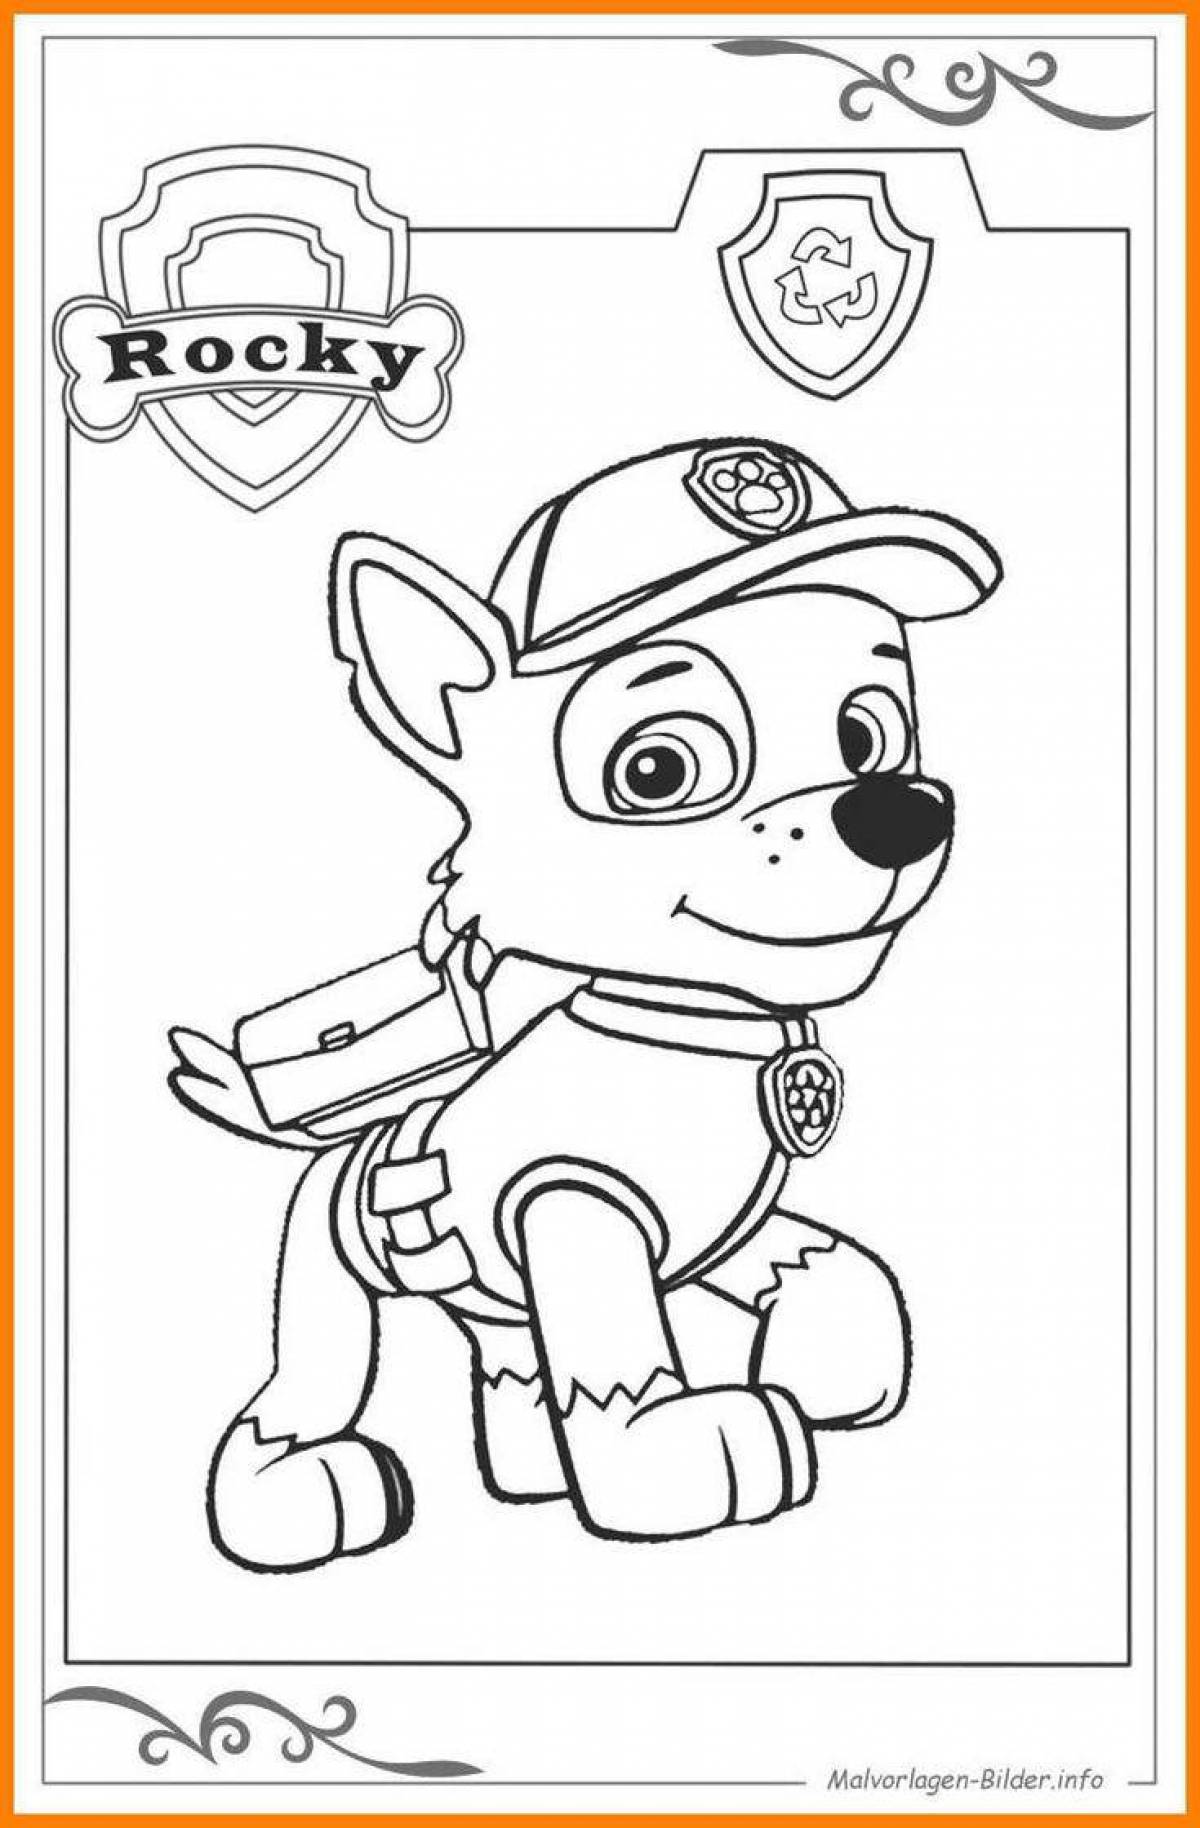 Fairytale Paw Patrol coloring book for kids